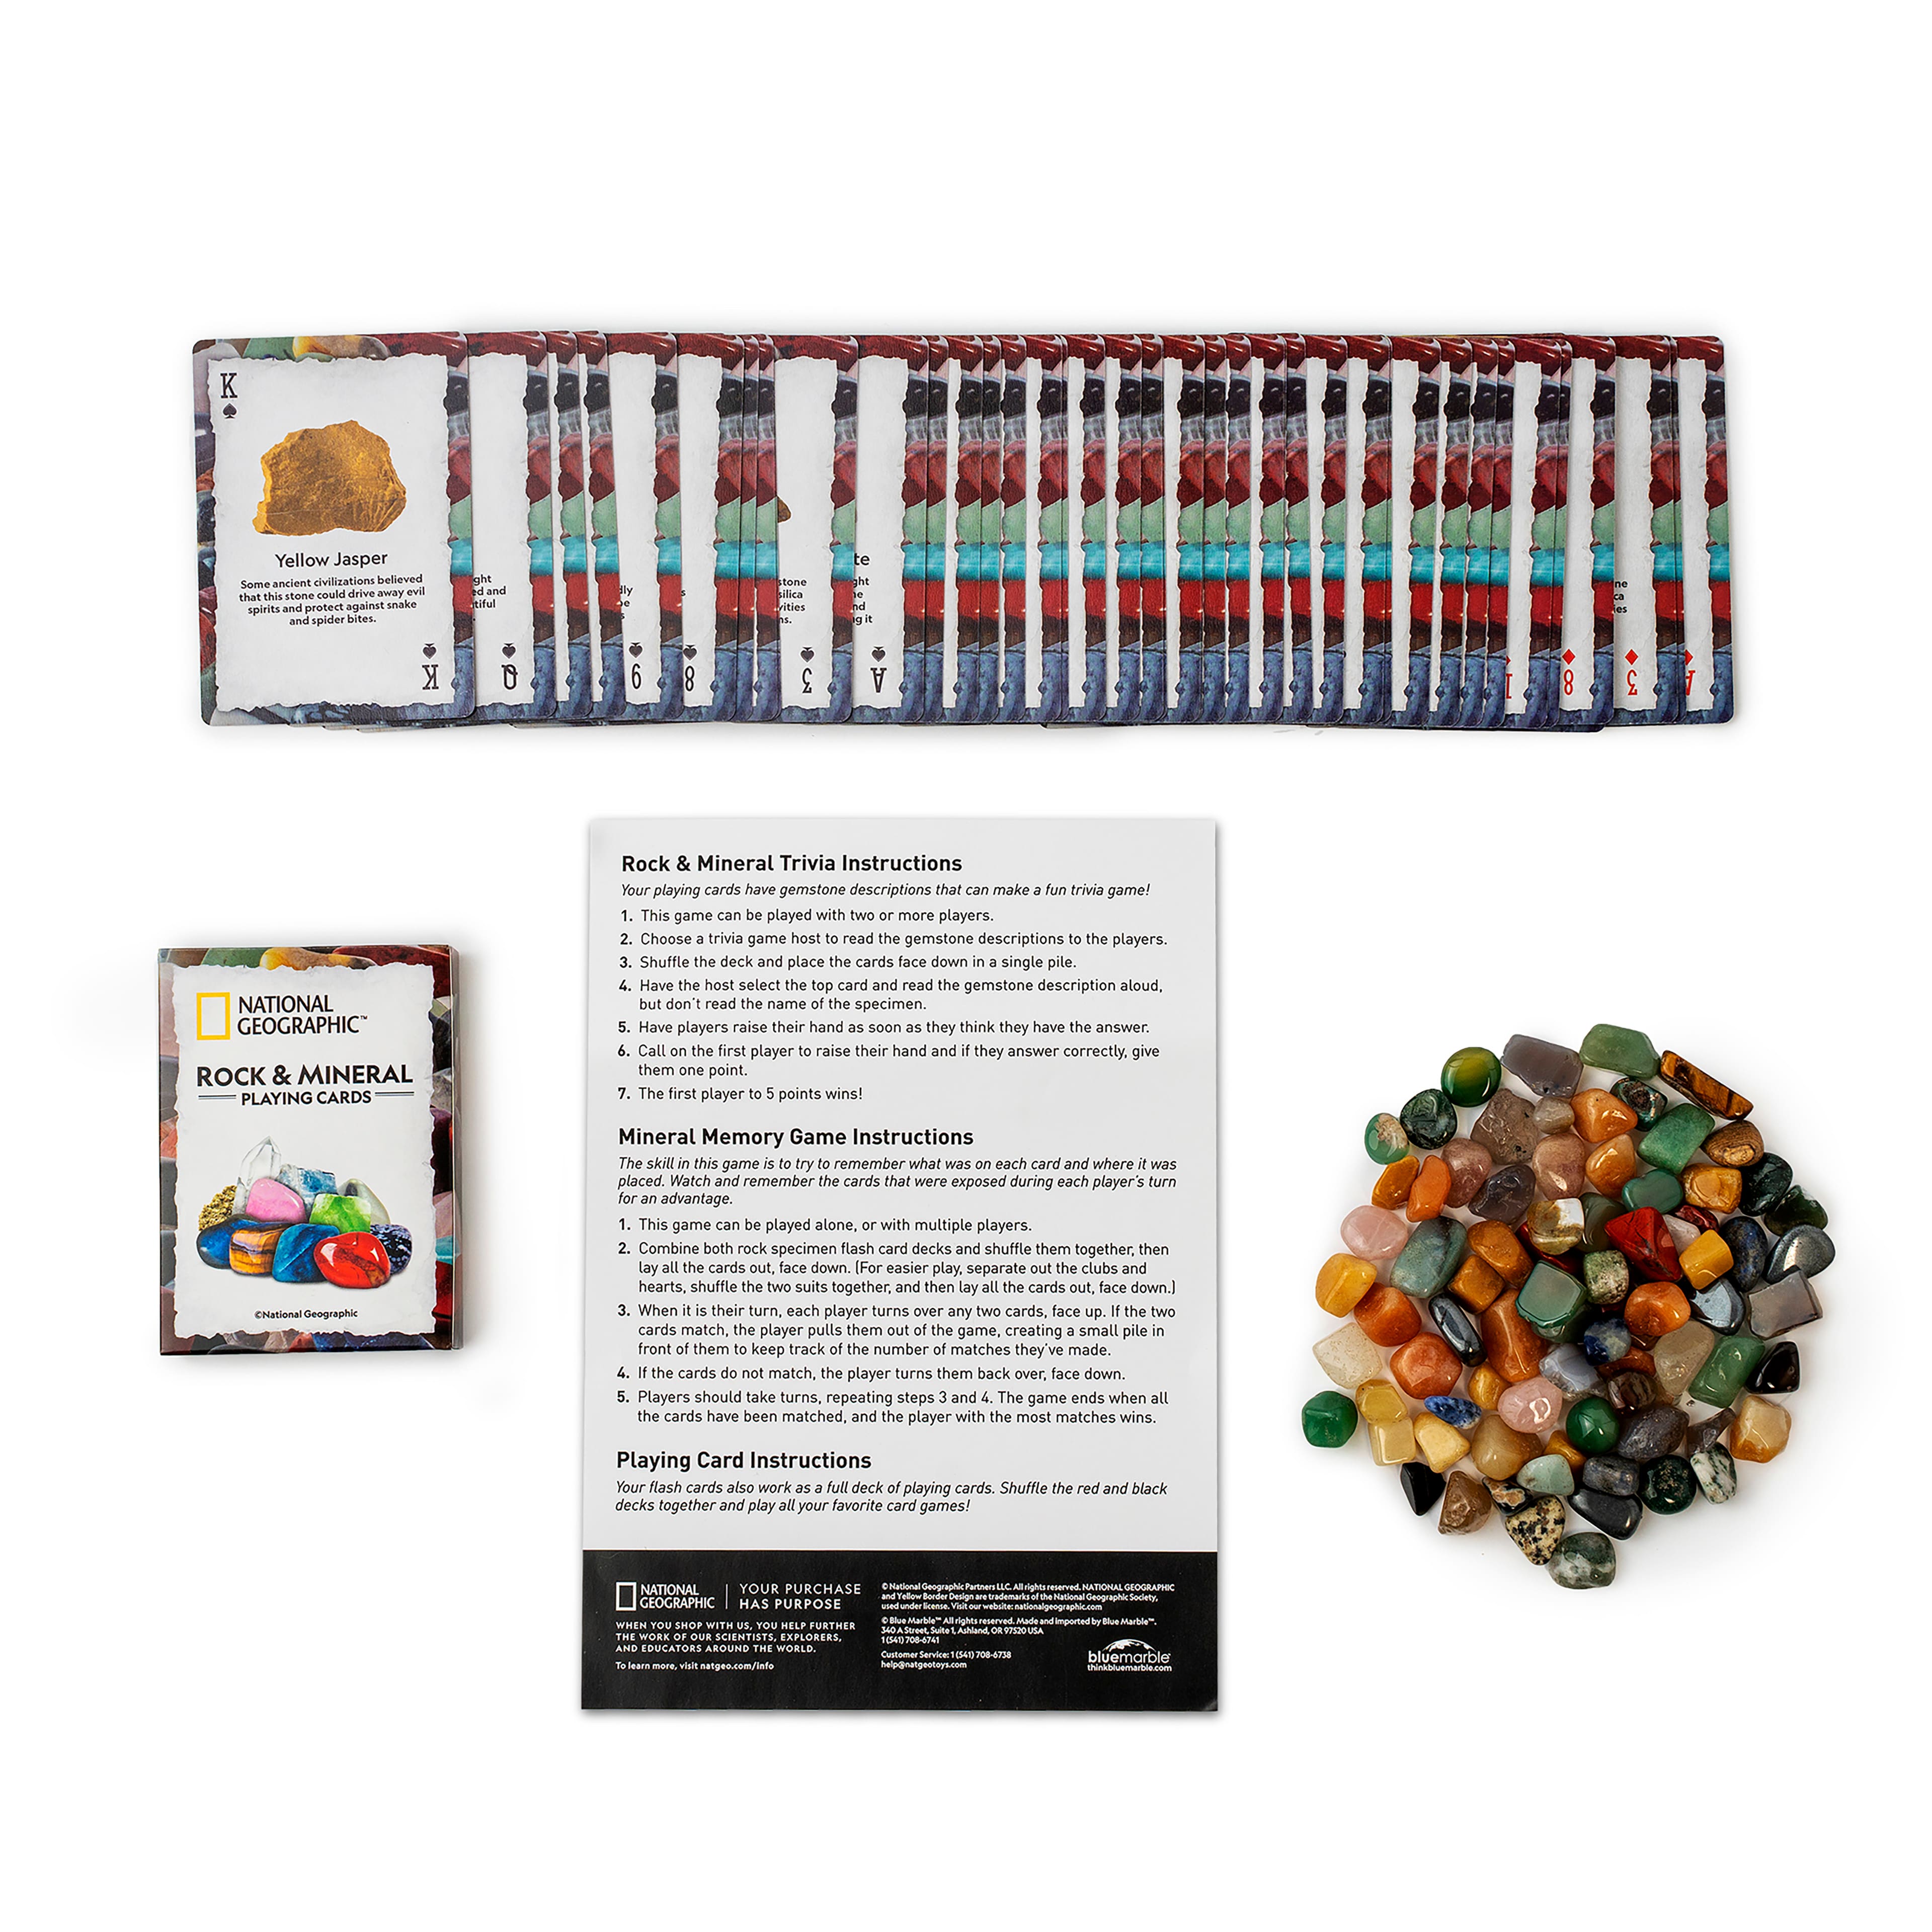 National Geographic&#x2122; S.T.E.M. Rock &#x26; Mineral Card Games